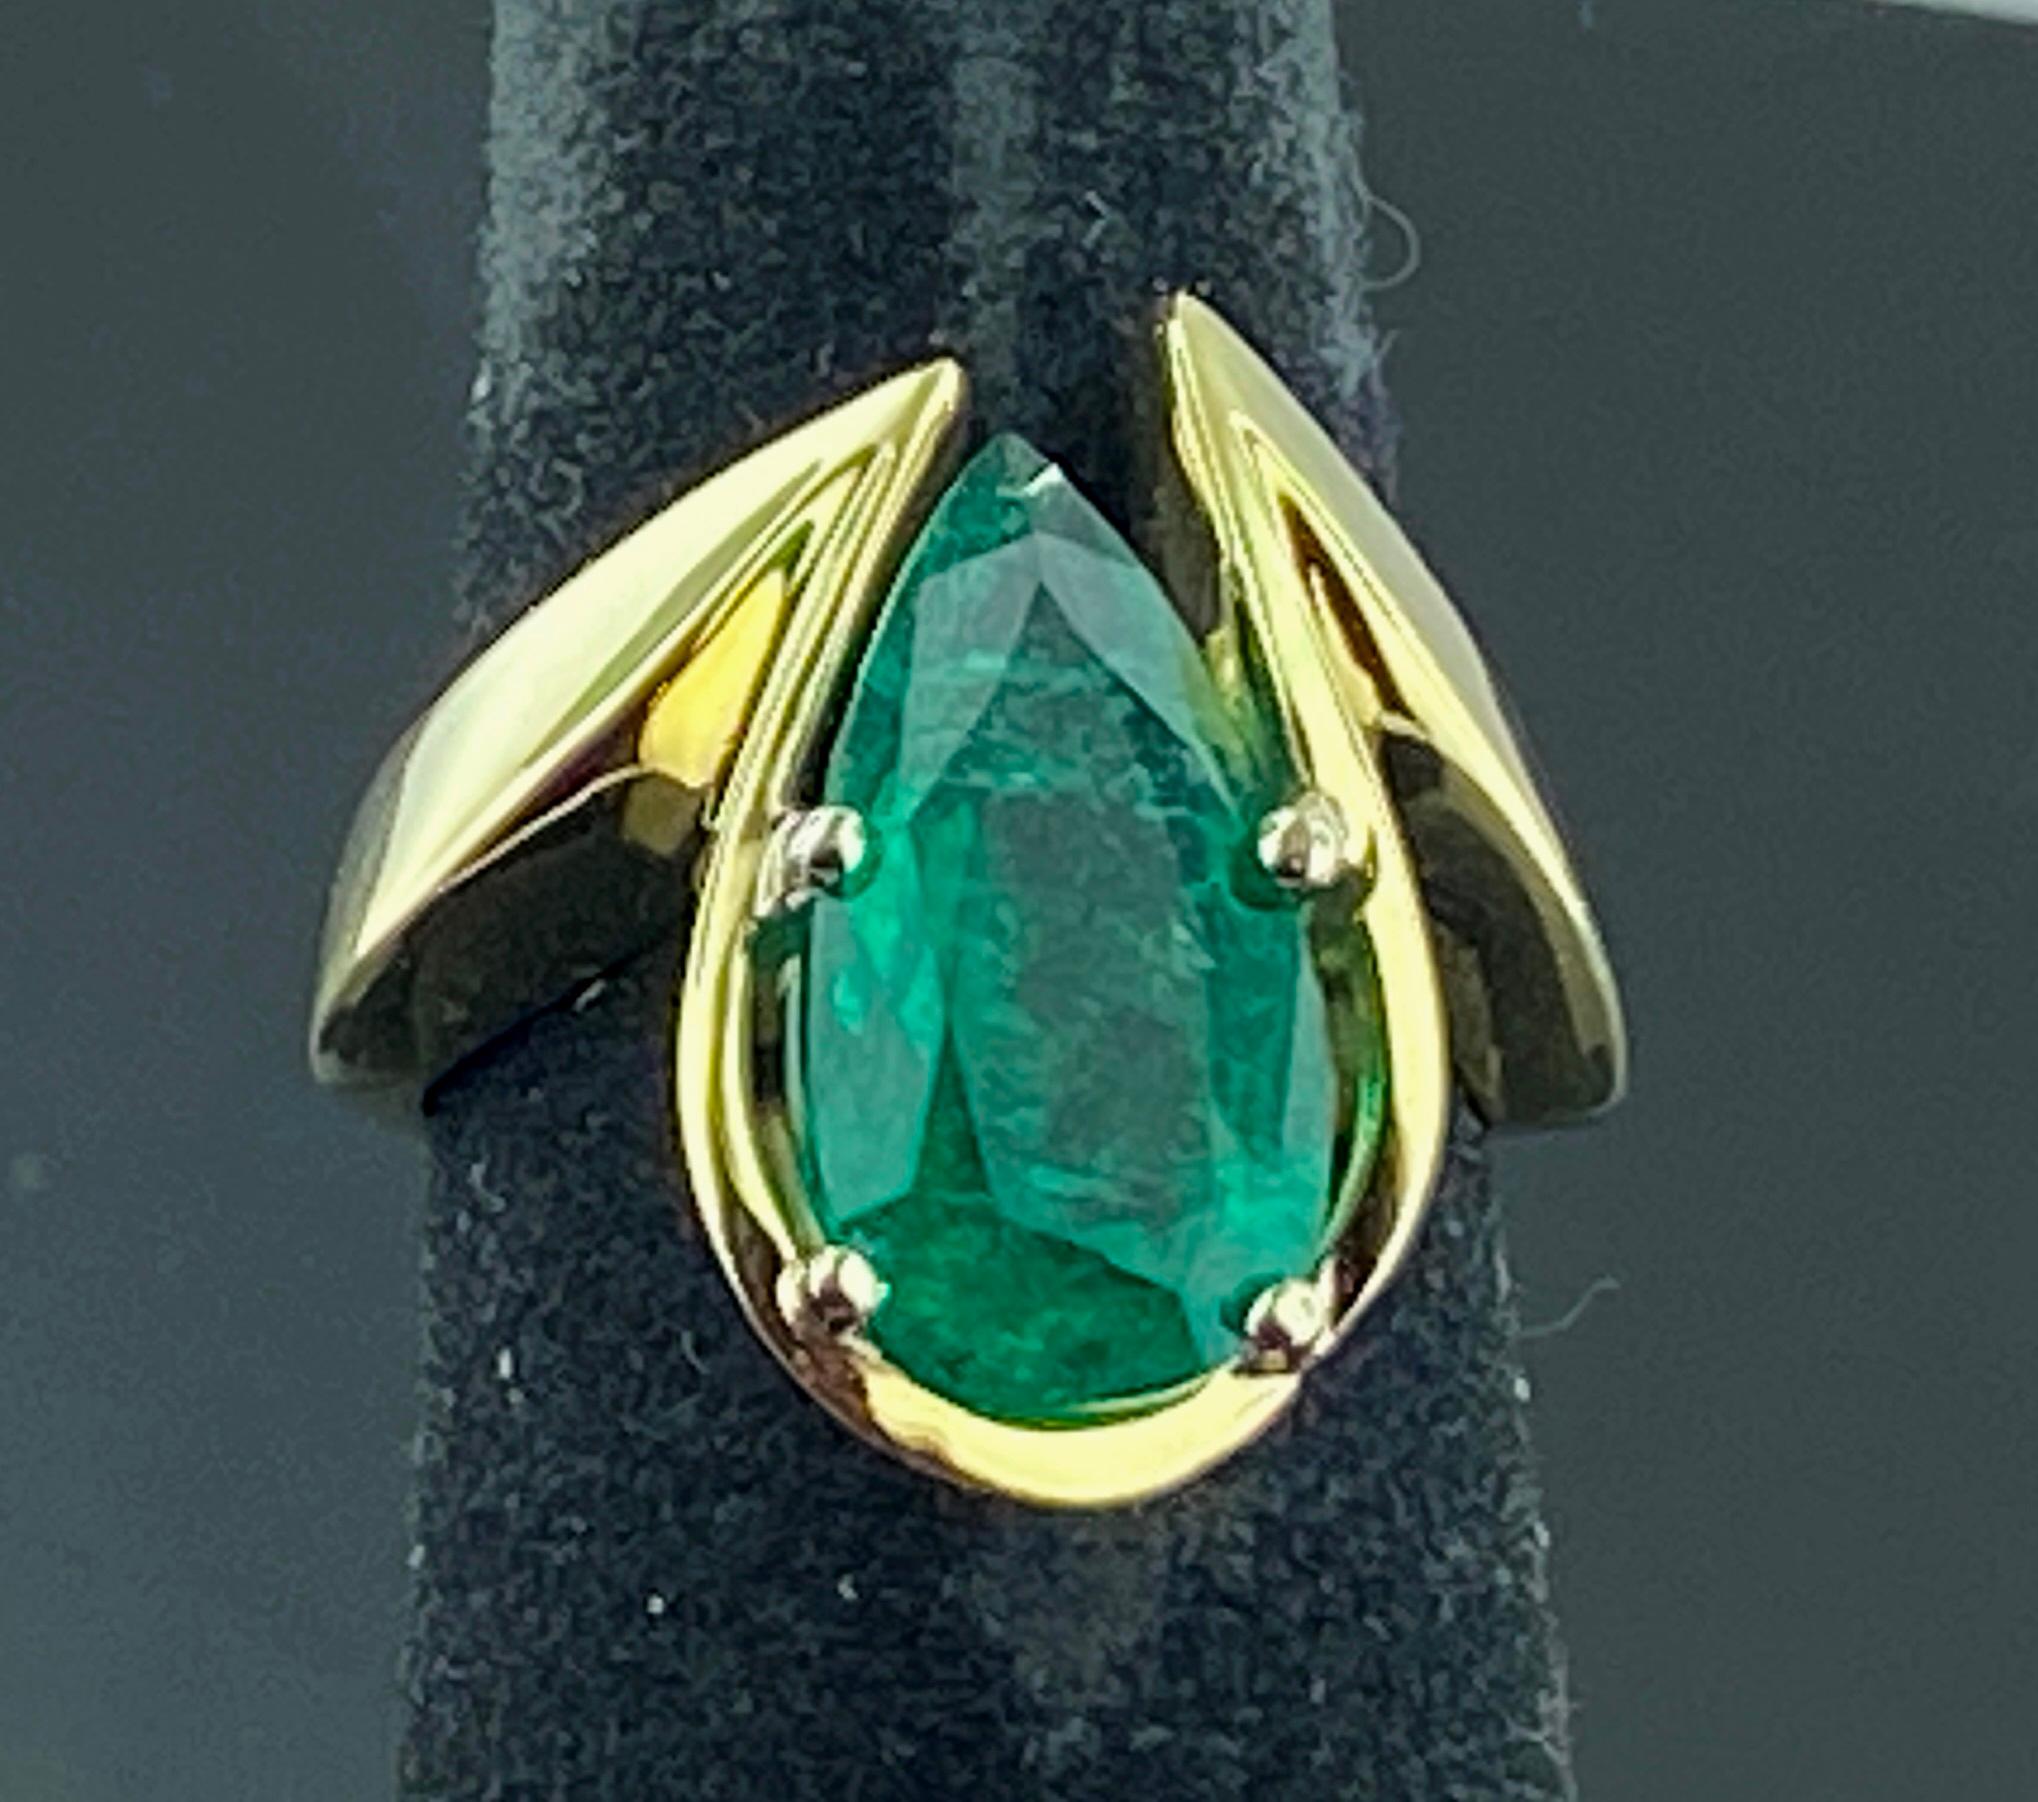 A very unique setting in 14 karat yellow gold with a 4.20 carat Pear Shaped Emerald as its focus.  Ring size is 7.25.